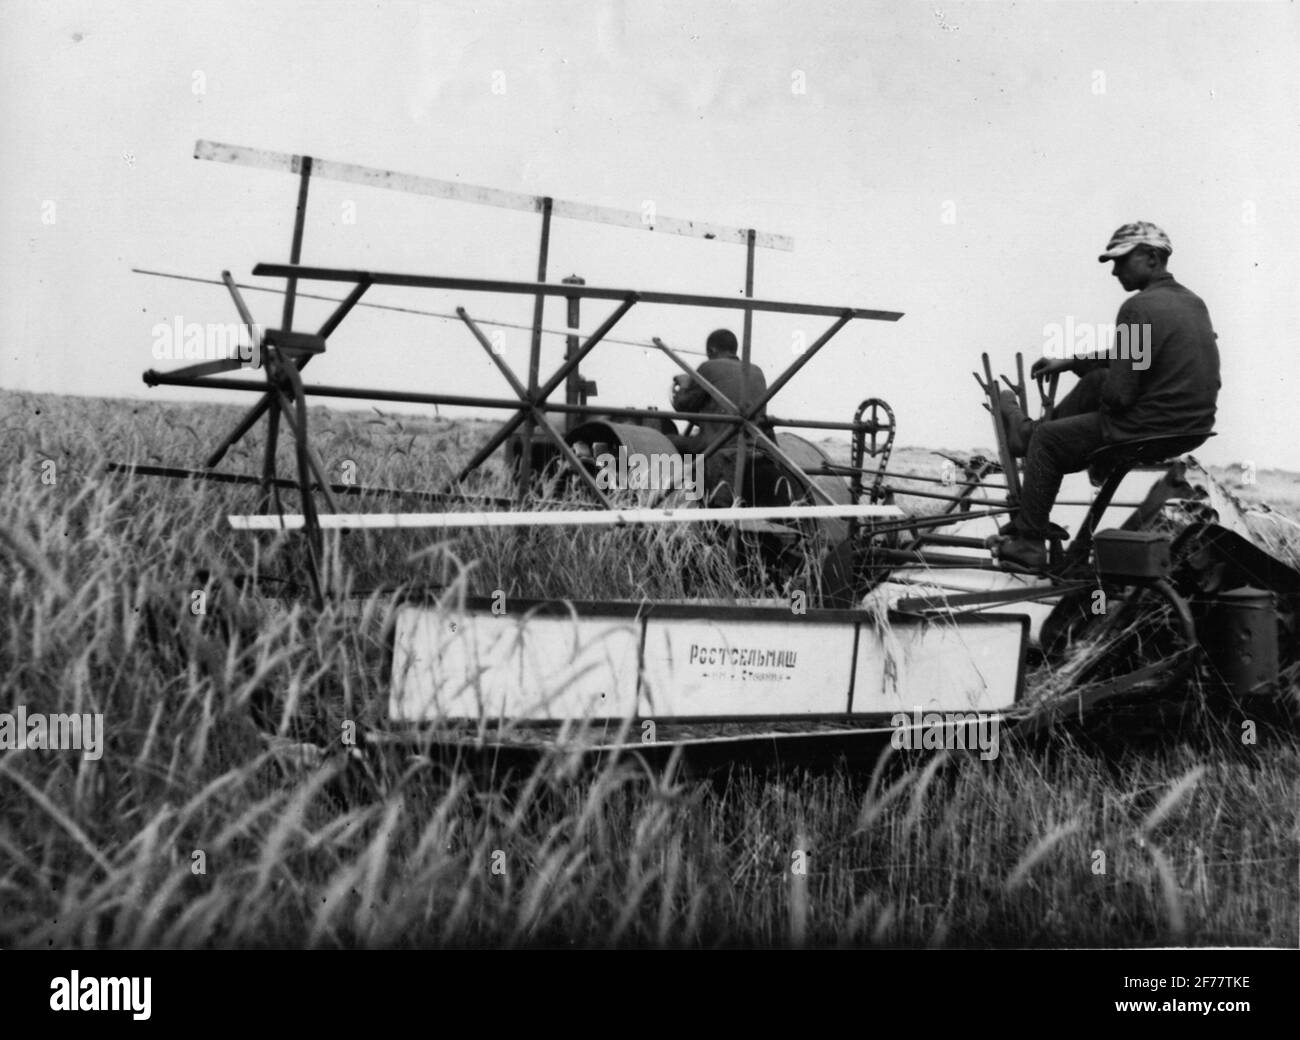 Agricultural machine at the agricultural exhibition in Moscow. Soviet machines on the carbon shoes fields. The agricultural machine 'Rostelmajs' belonging to the Kolkhosen 'October 12' in the Urjupinsk part. Stock Photo